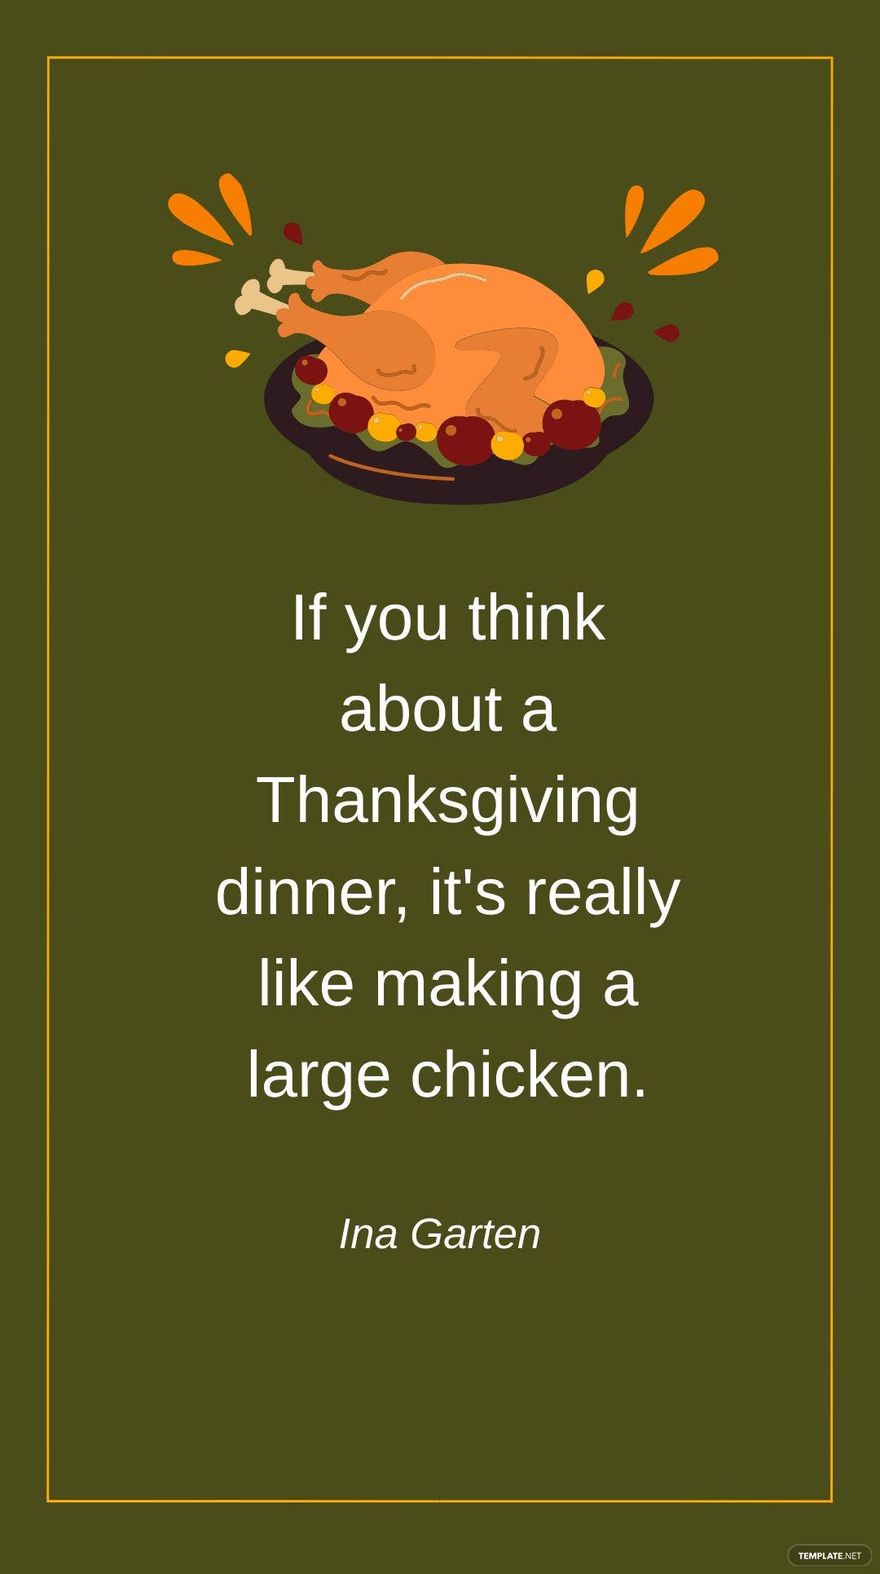 Free Ina Garten - If you think about a Thanksgiving dinner, it's really like making a large chicken. in JPG